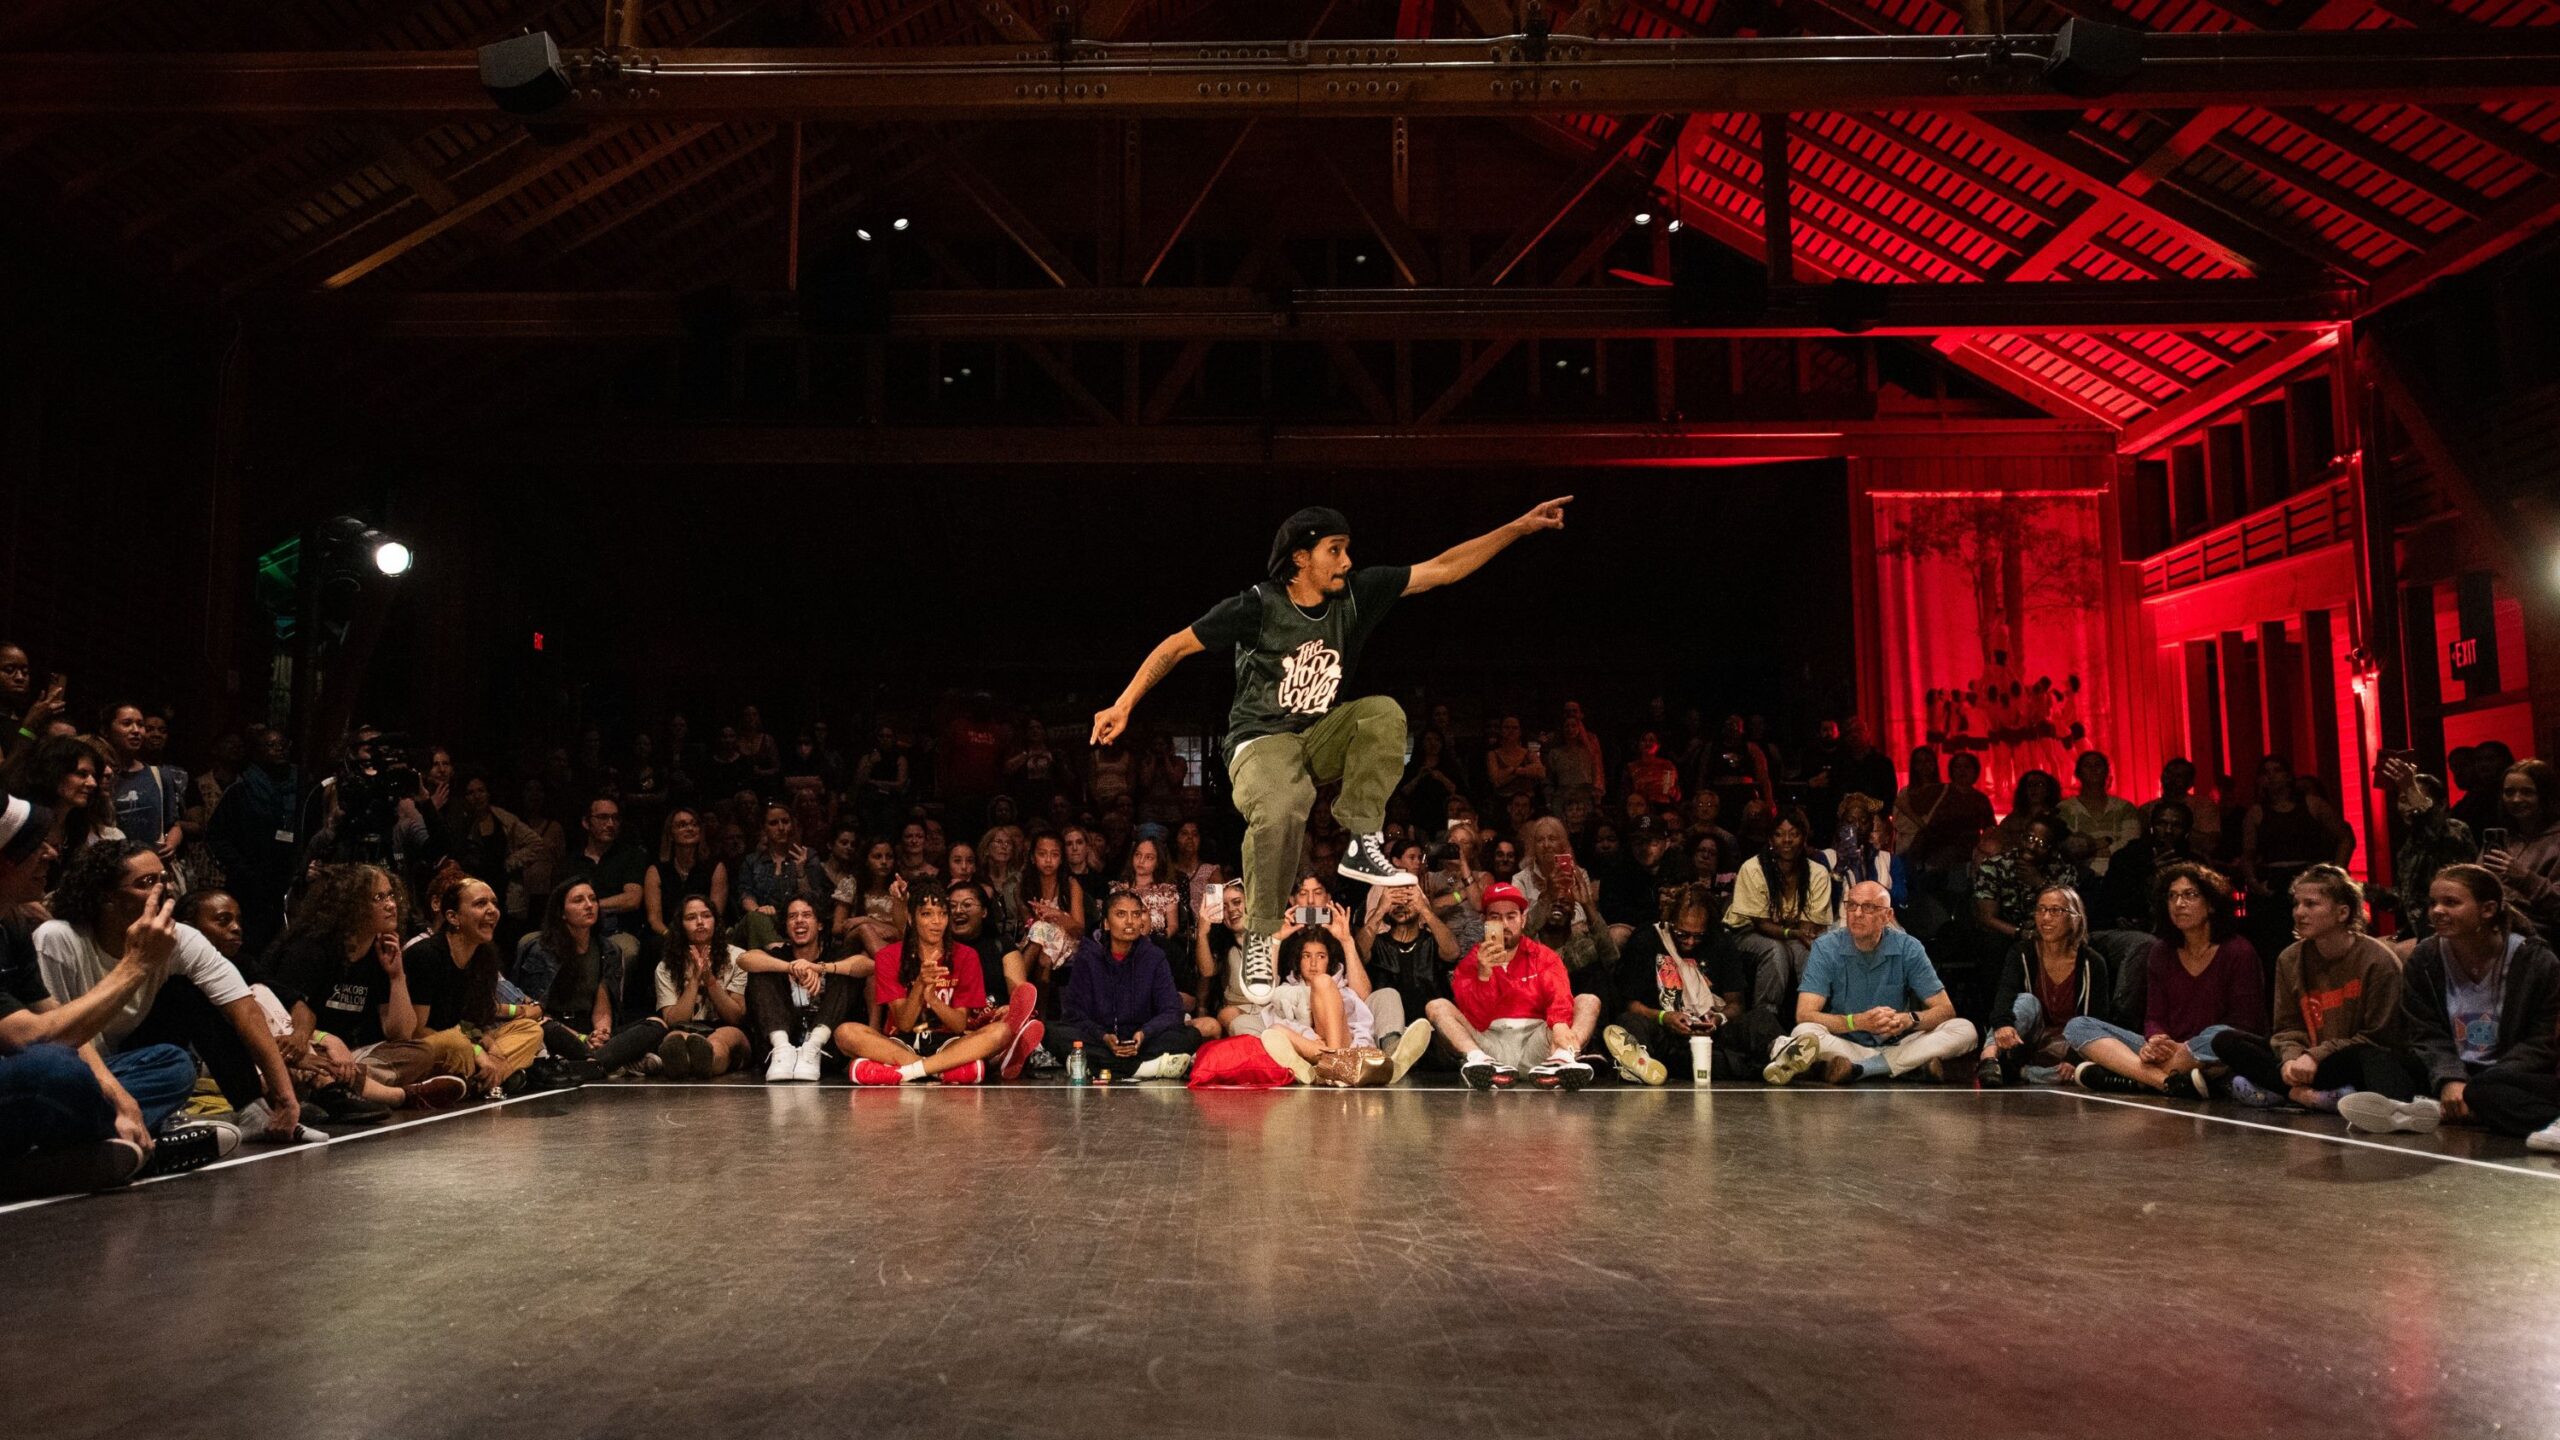 A hip hop dancer wearing a black shirt, black cap, and cargo pants jumps in the air and points to one side. A crowd of people watches on.